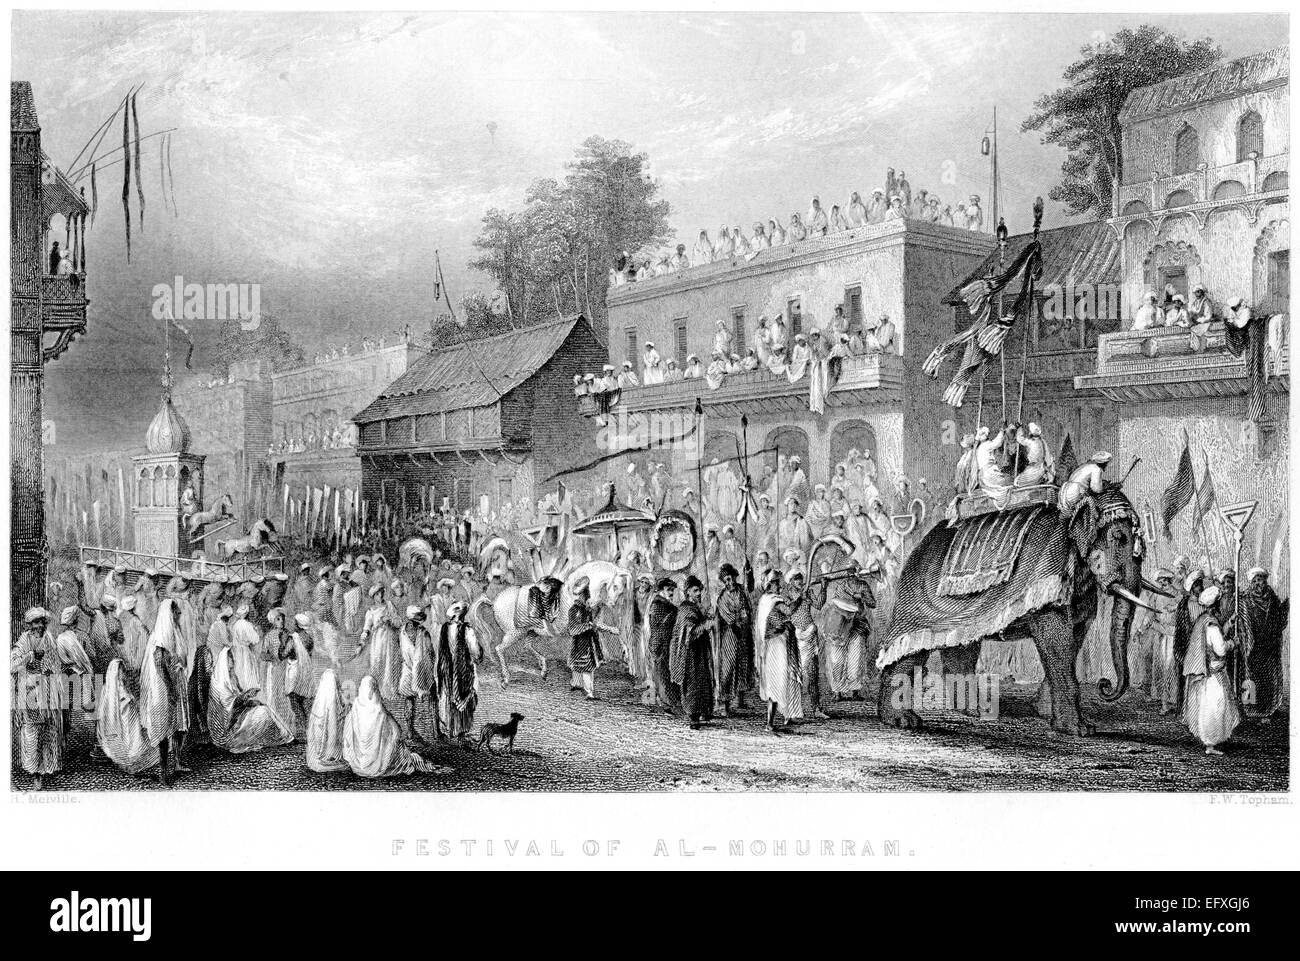 An engraving of the Festival of Al Mohurram scanned at high resolution from a book printed in 1845. Believed copyright free. Stock Photo